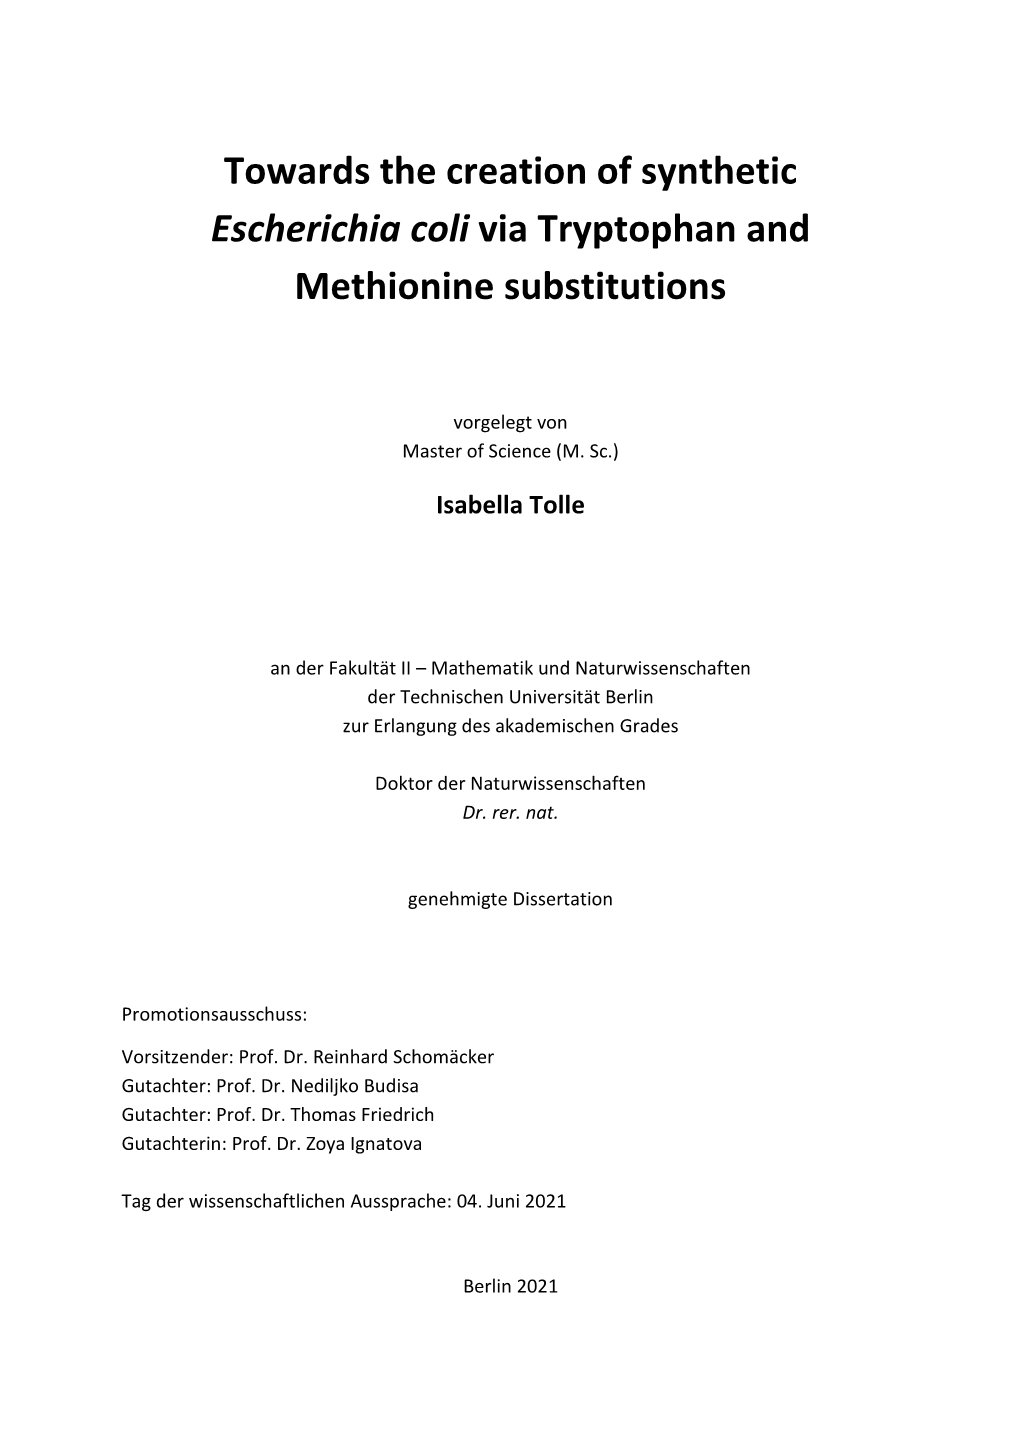 Towards the Creation of Synthetic Escherichia Coli Via Tryptophan and Methionine Substitutions